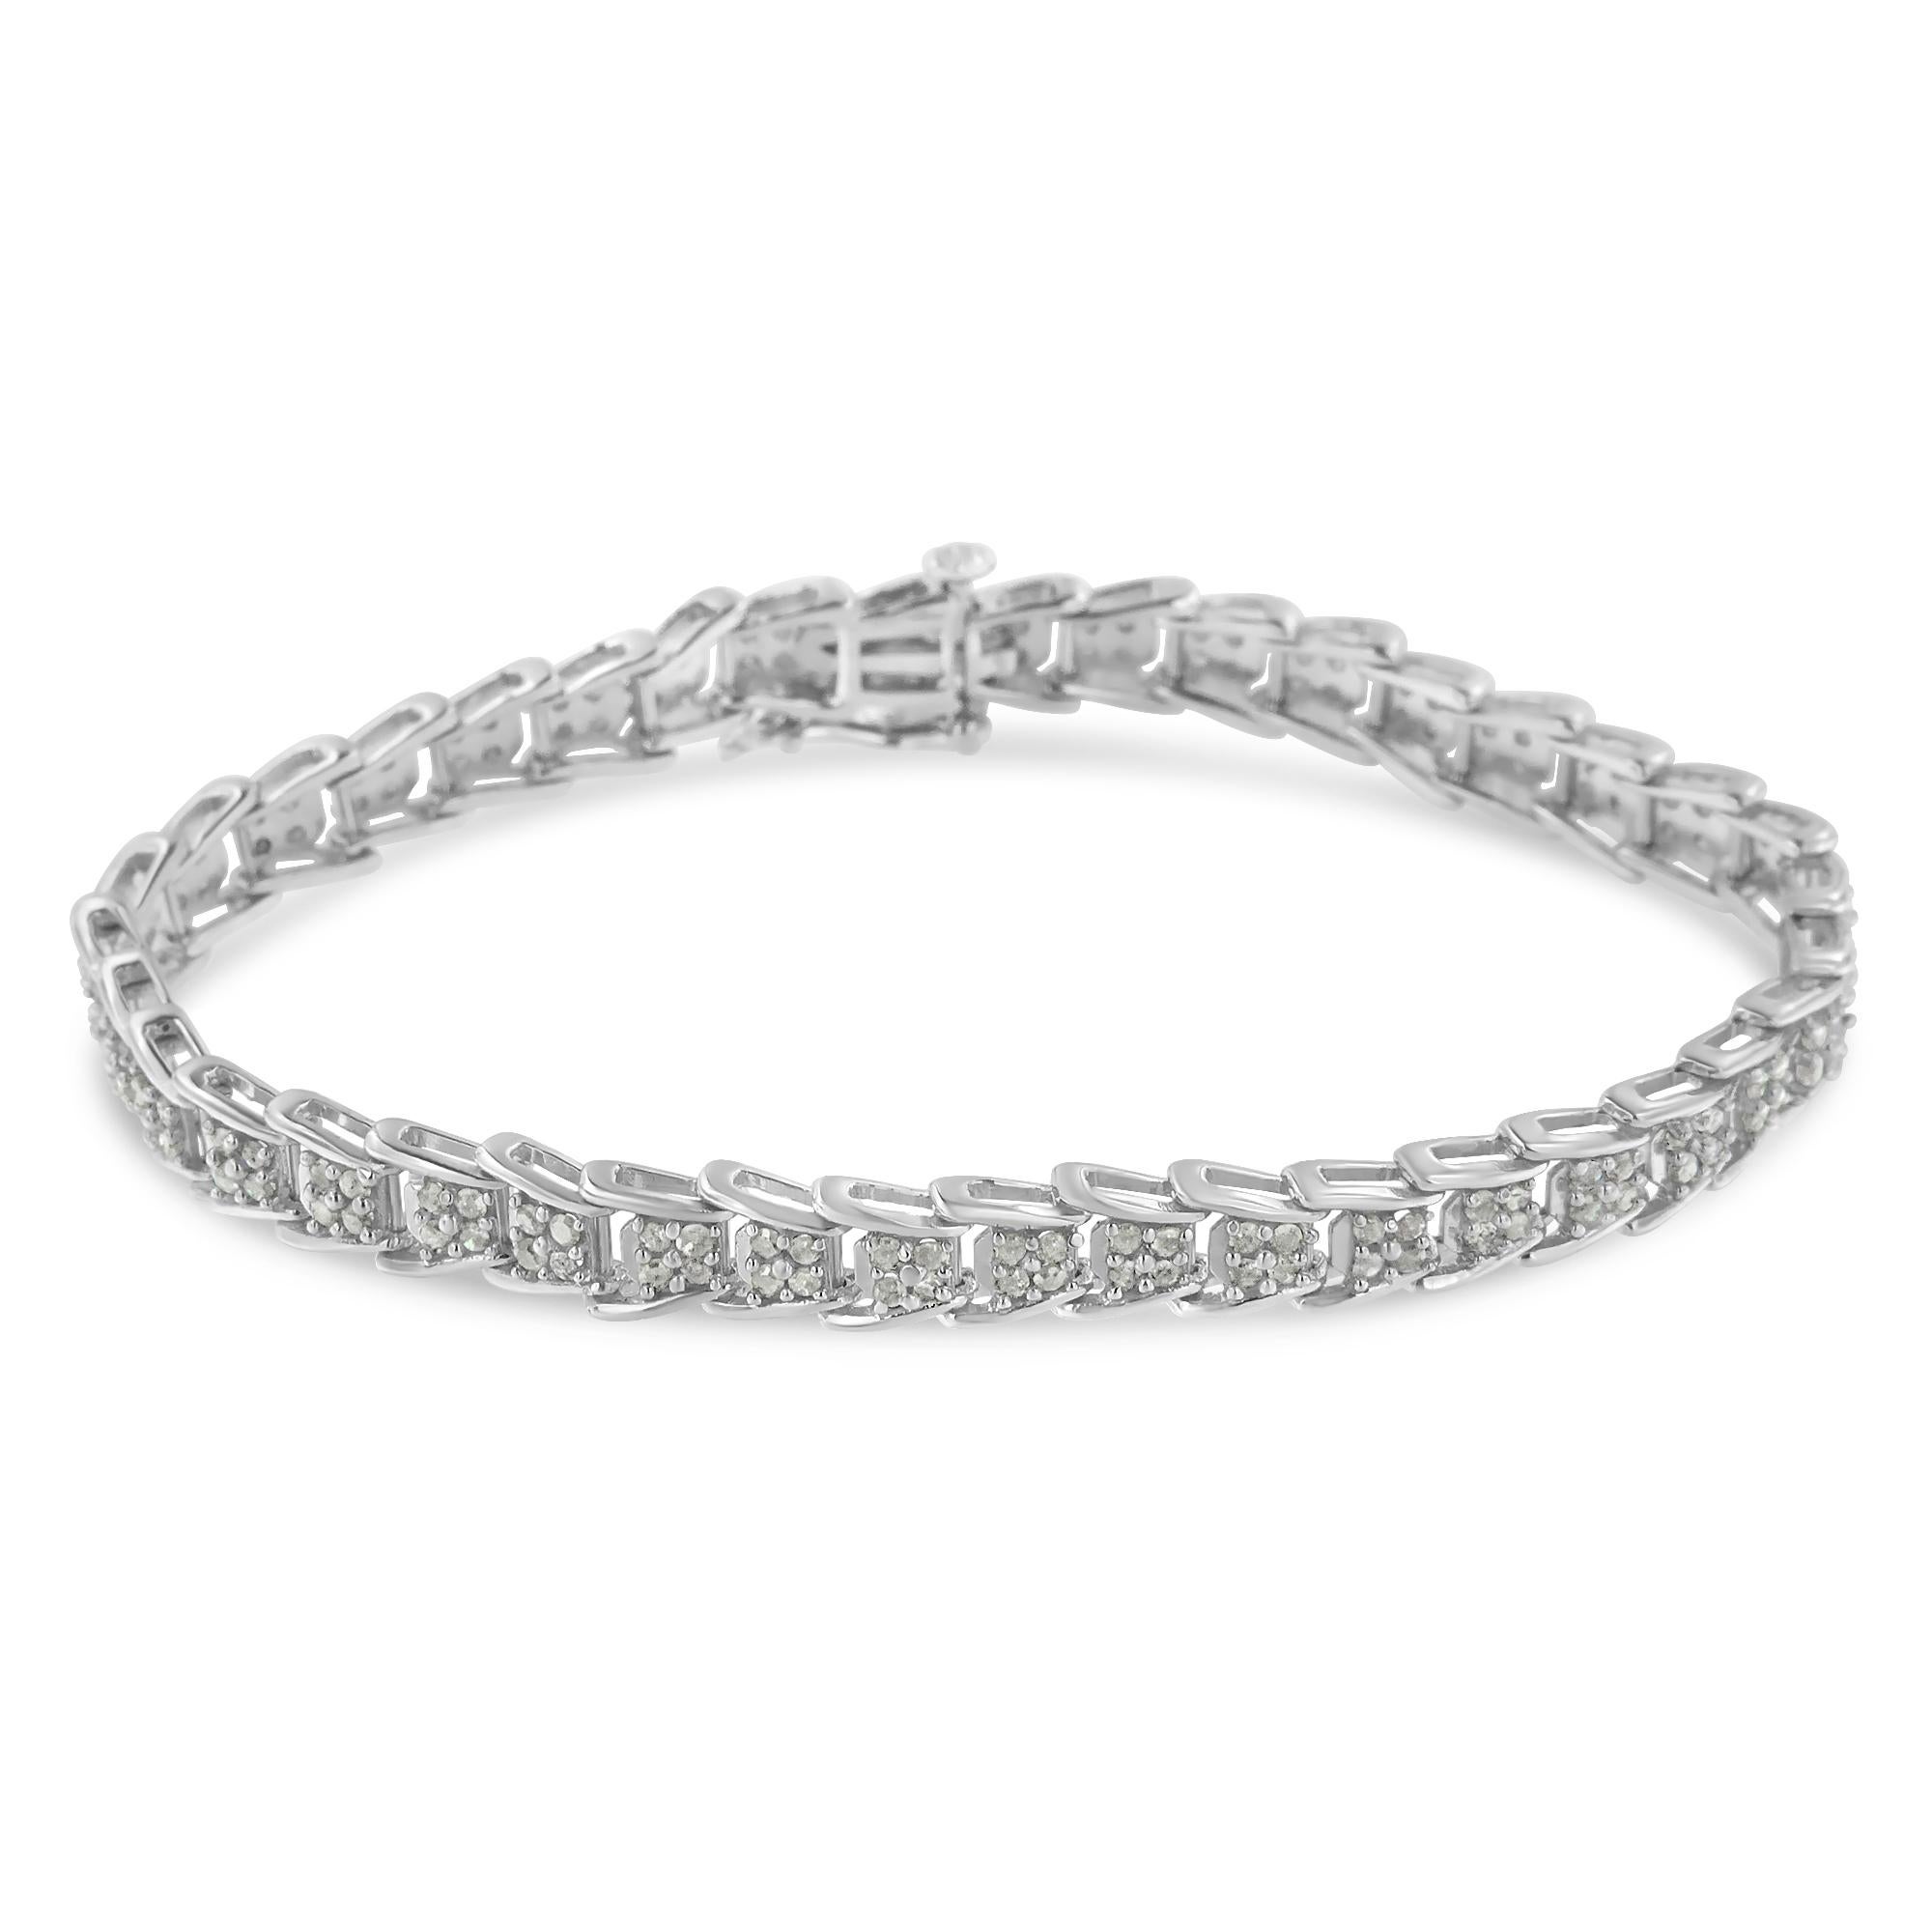 Crafted in 10k white gold, this stunning tennis bracelet features 2ct TDW of glittering round cut diamonds. Each link is inlaid with four prong set diamonds and fans out to fit onto the next one creating a unique effect. A box clasp mechanism keeps